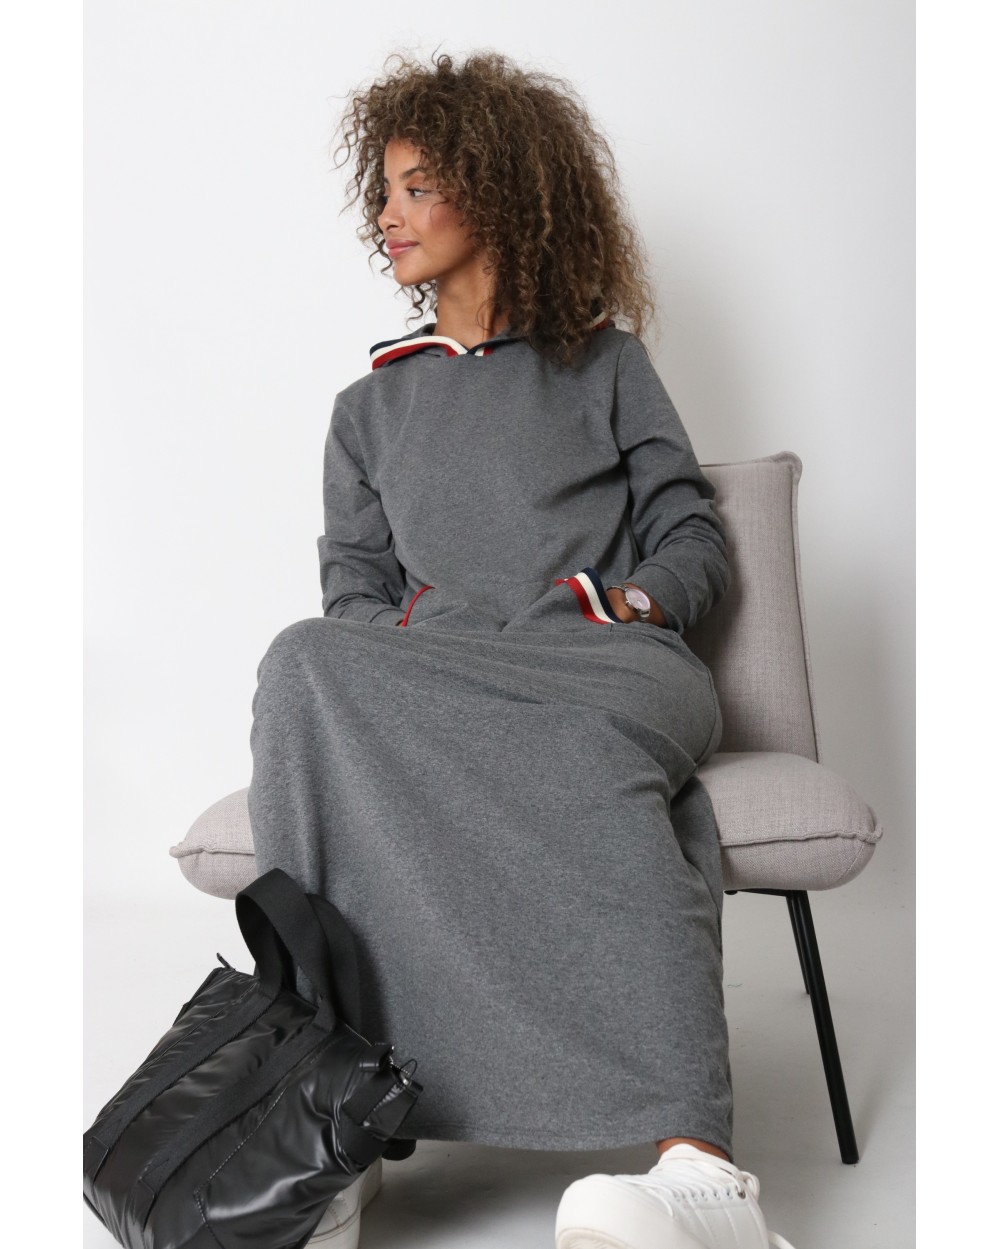 grey color dress for women